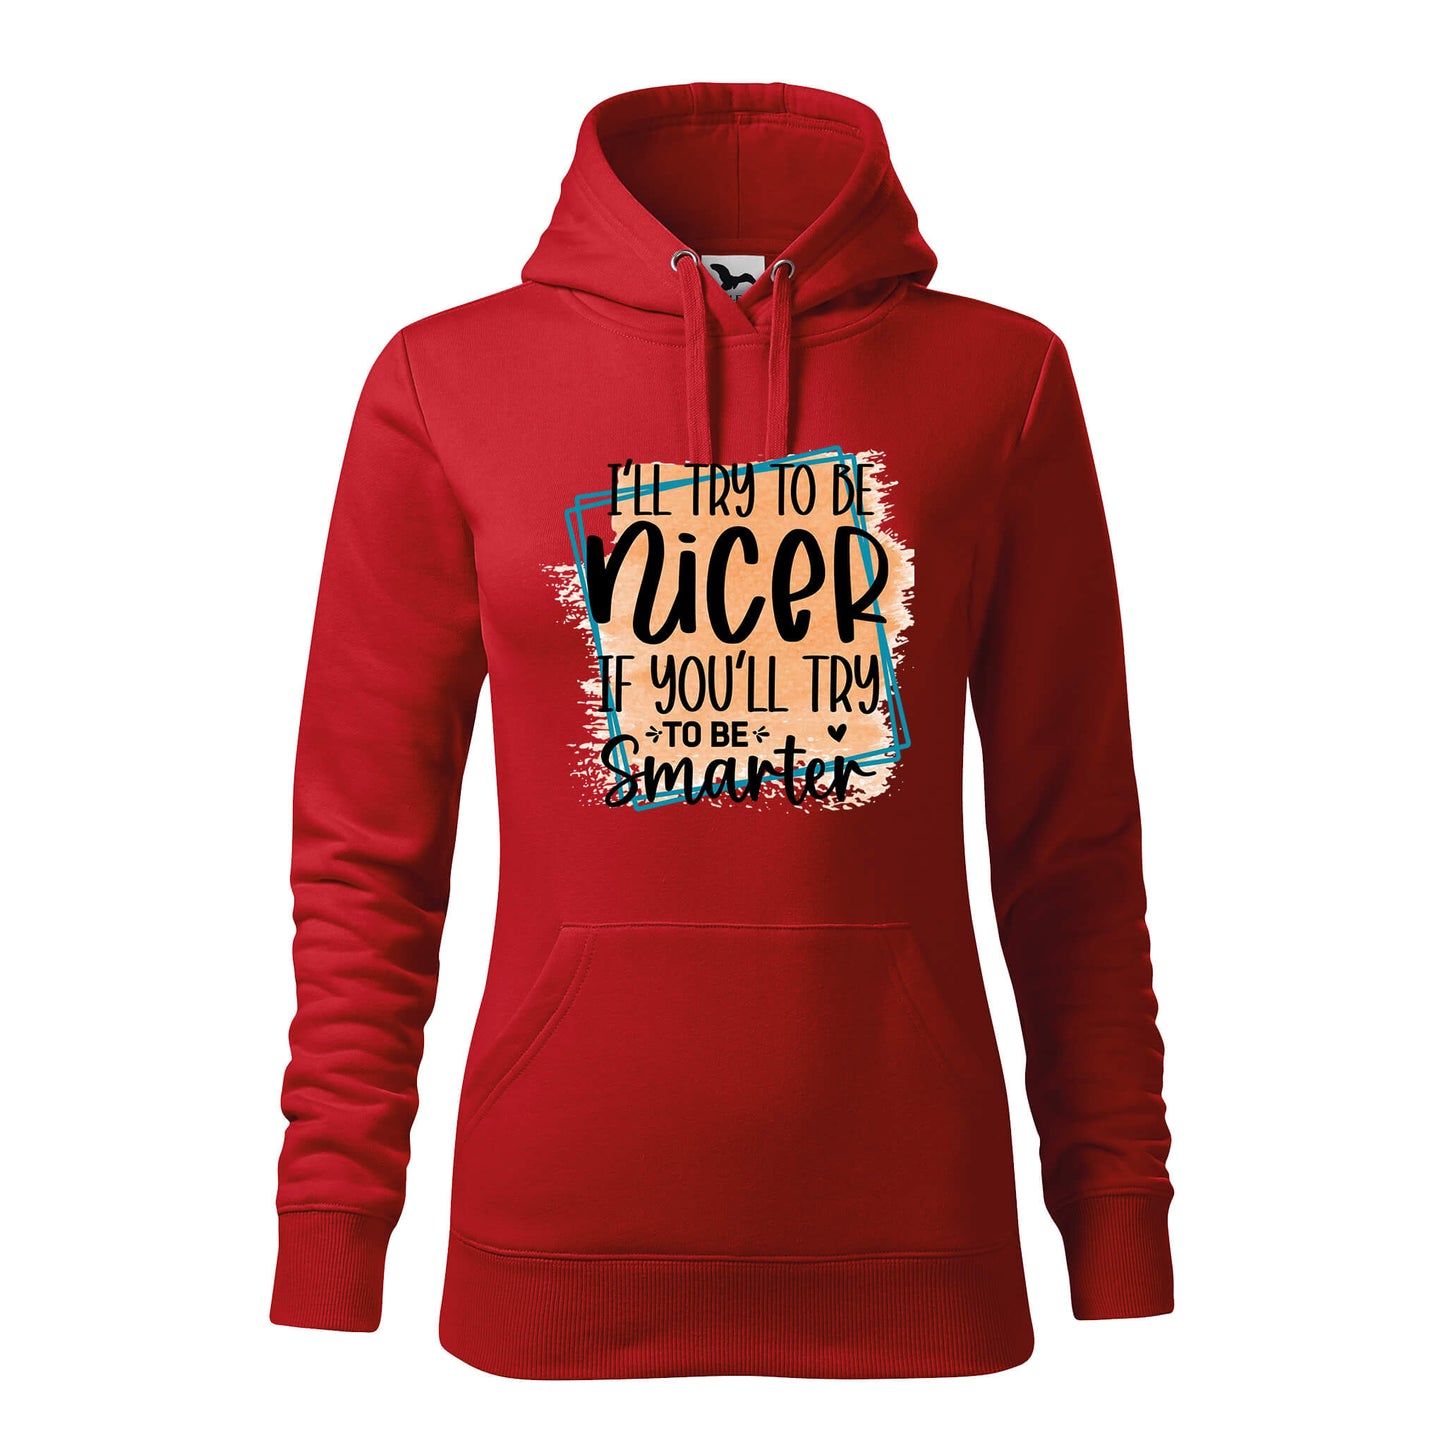 Ill try to be nicer hoodie - rvdesignprint